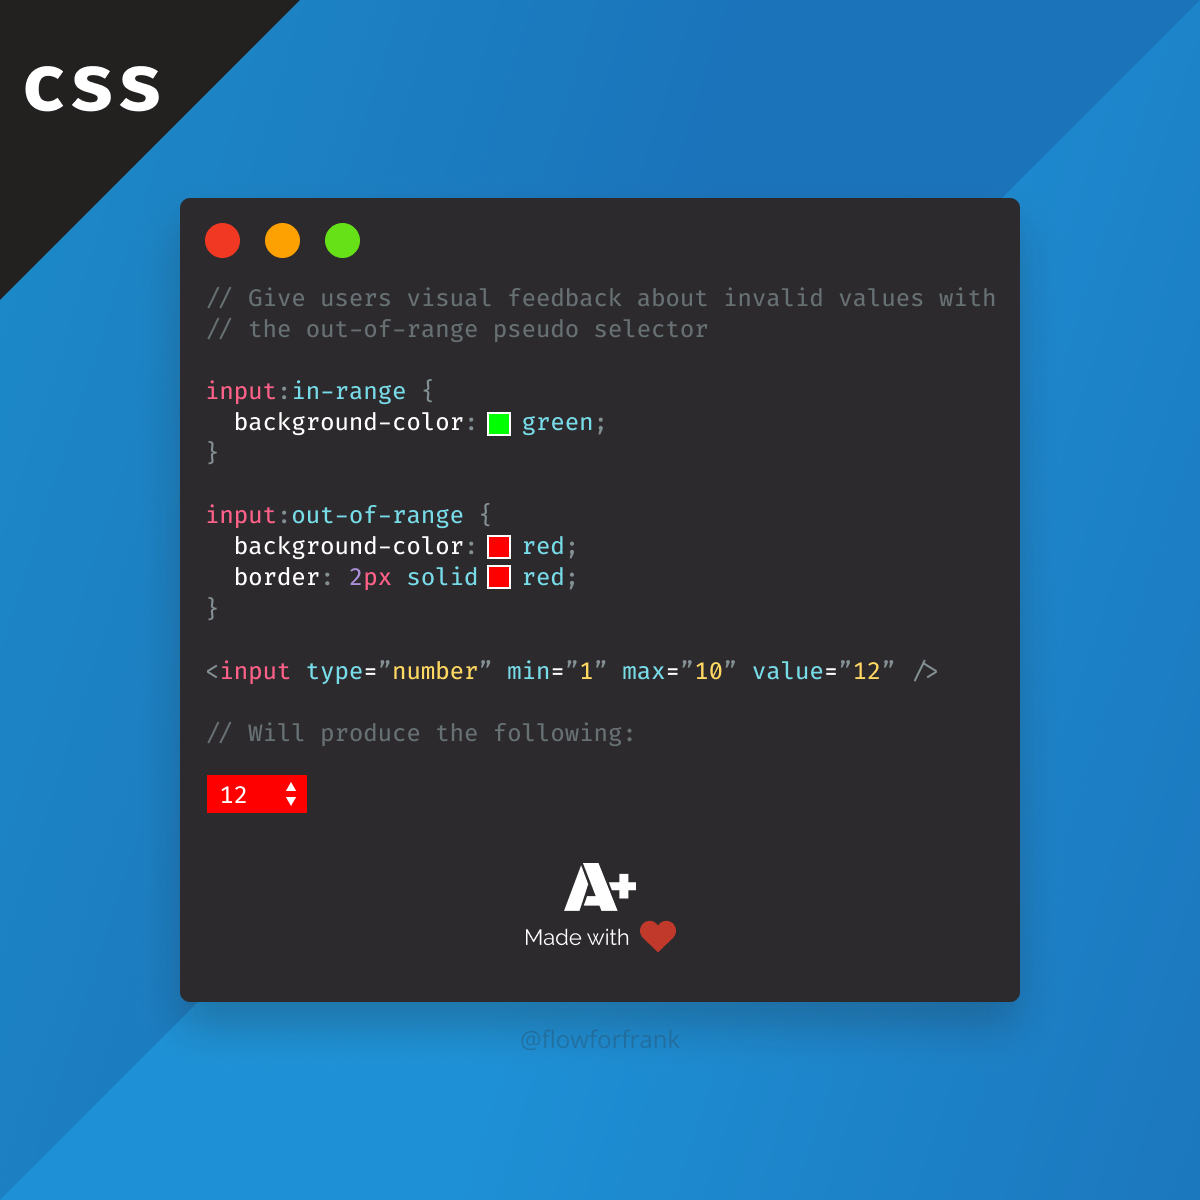 How to keep image aspect ratio in CSS